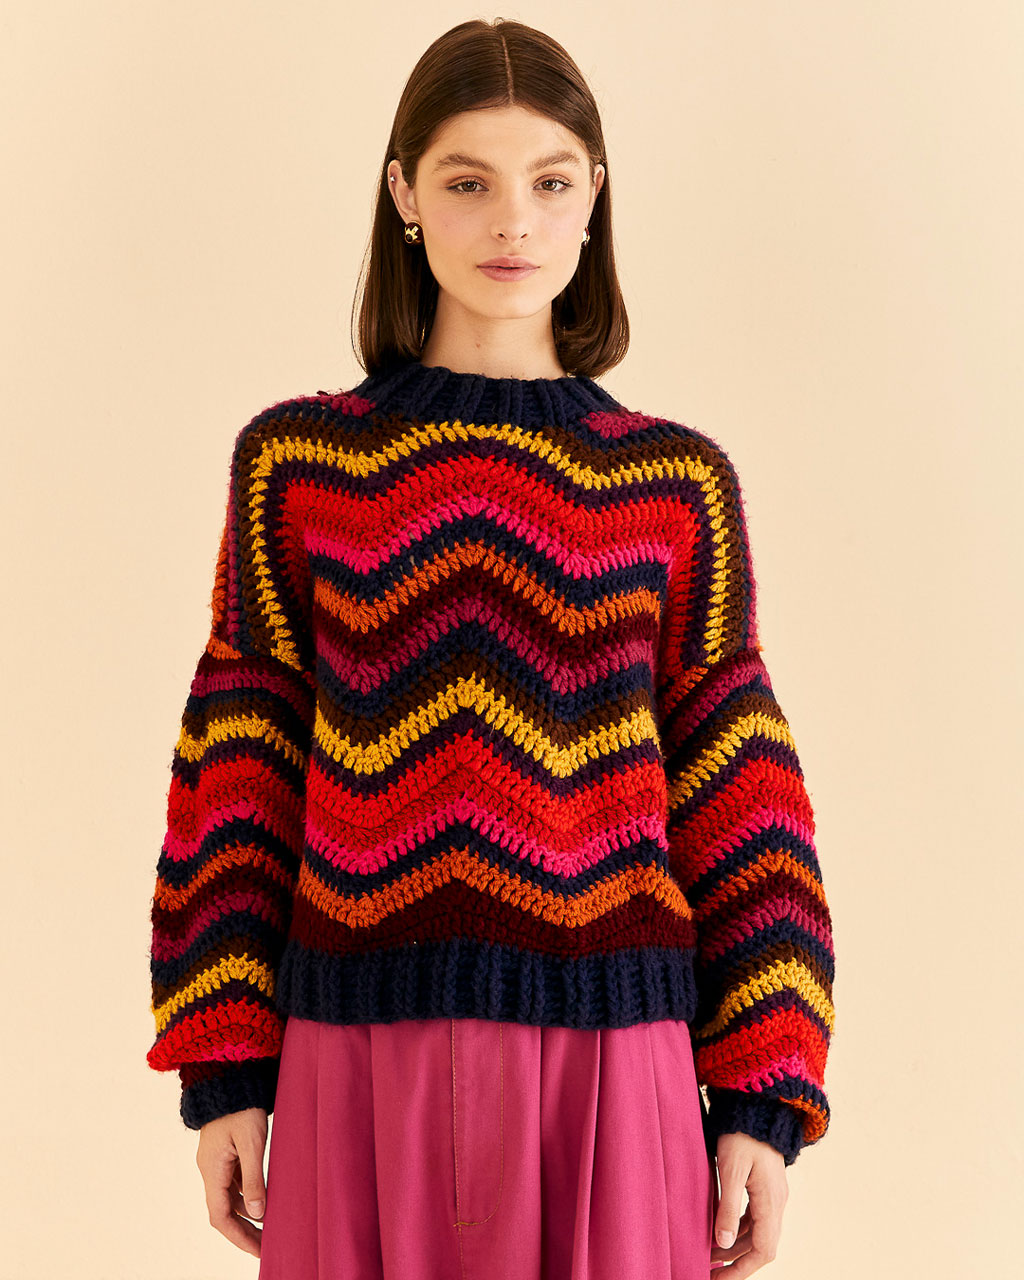 Breeze Along Striped Sweater, Groovy's, Lightweight Sweater, Colorful